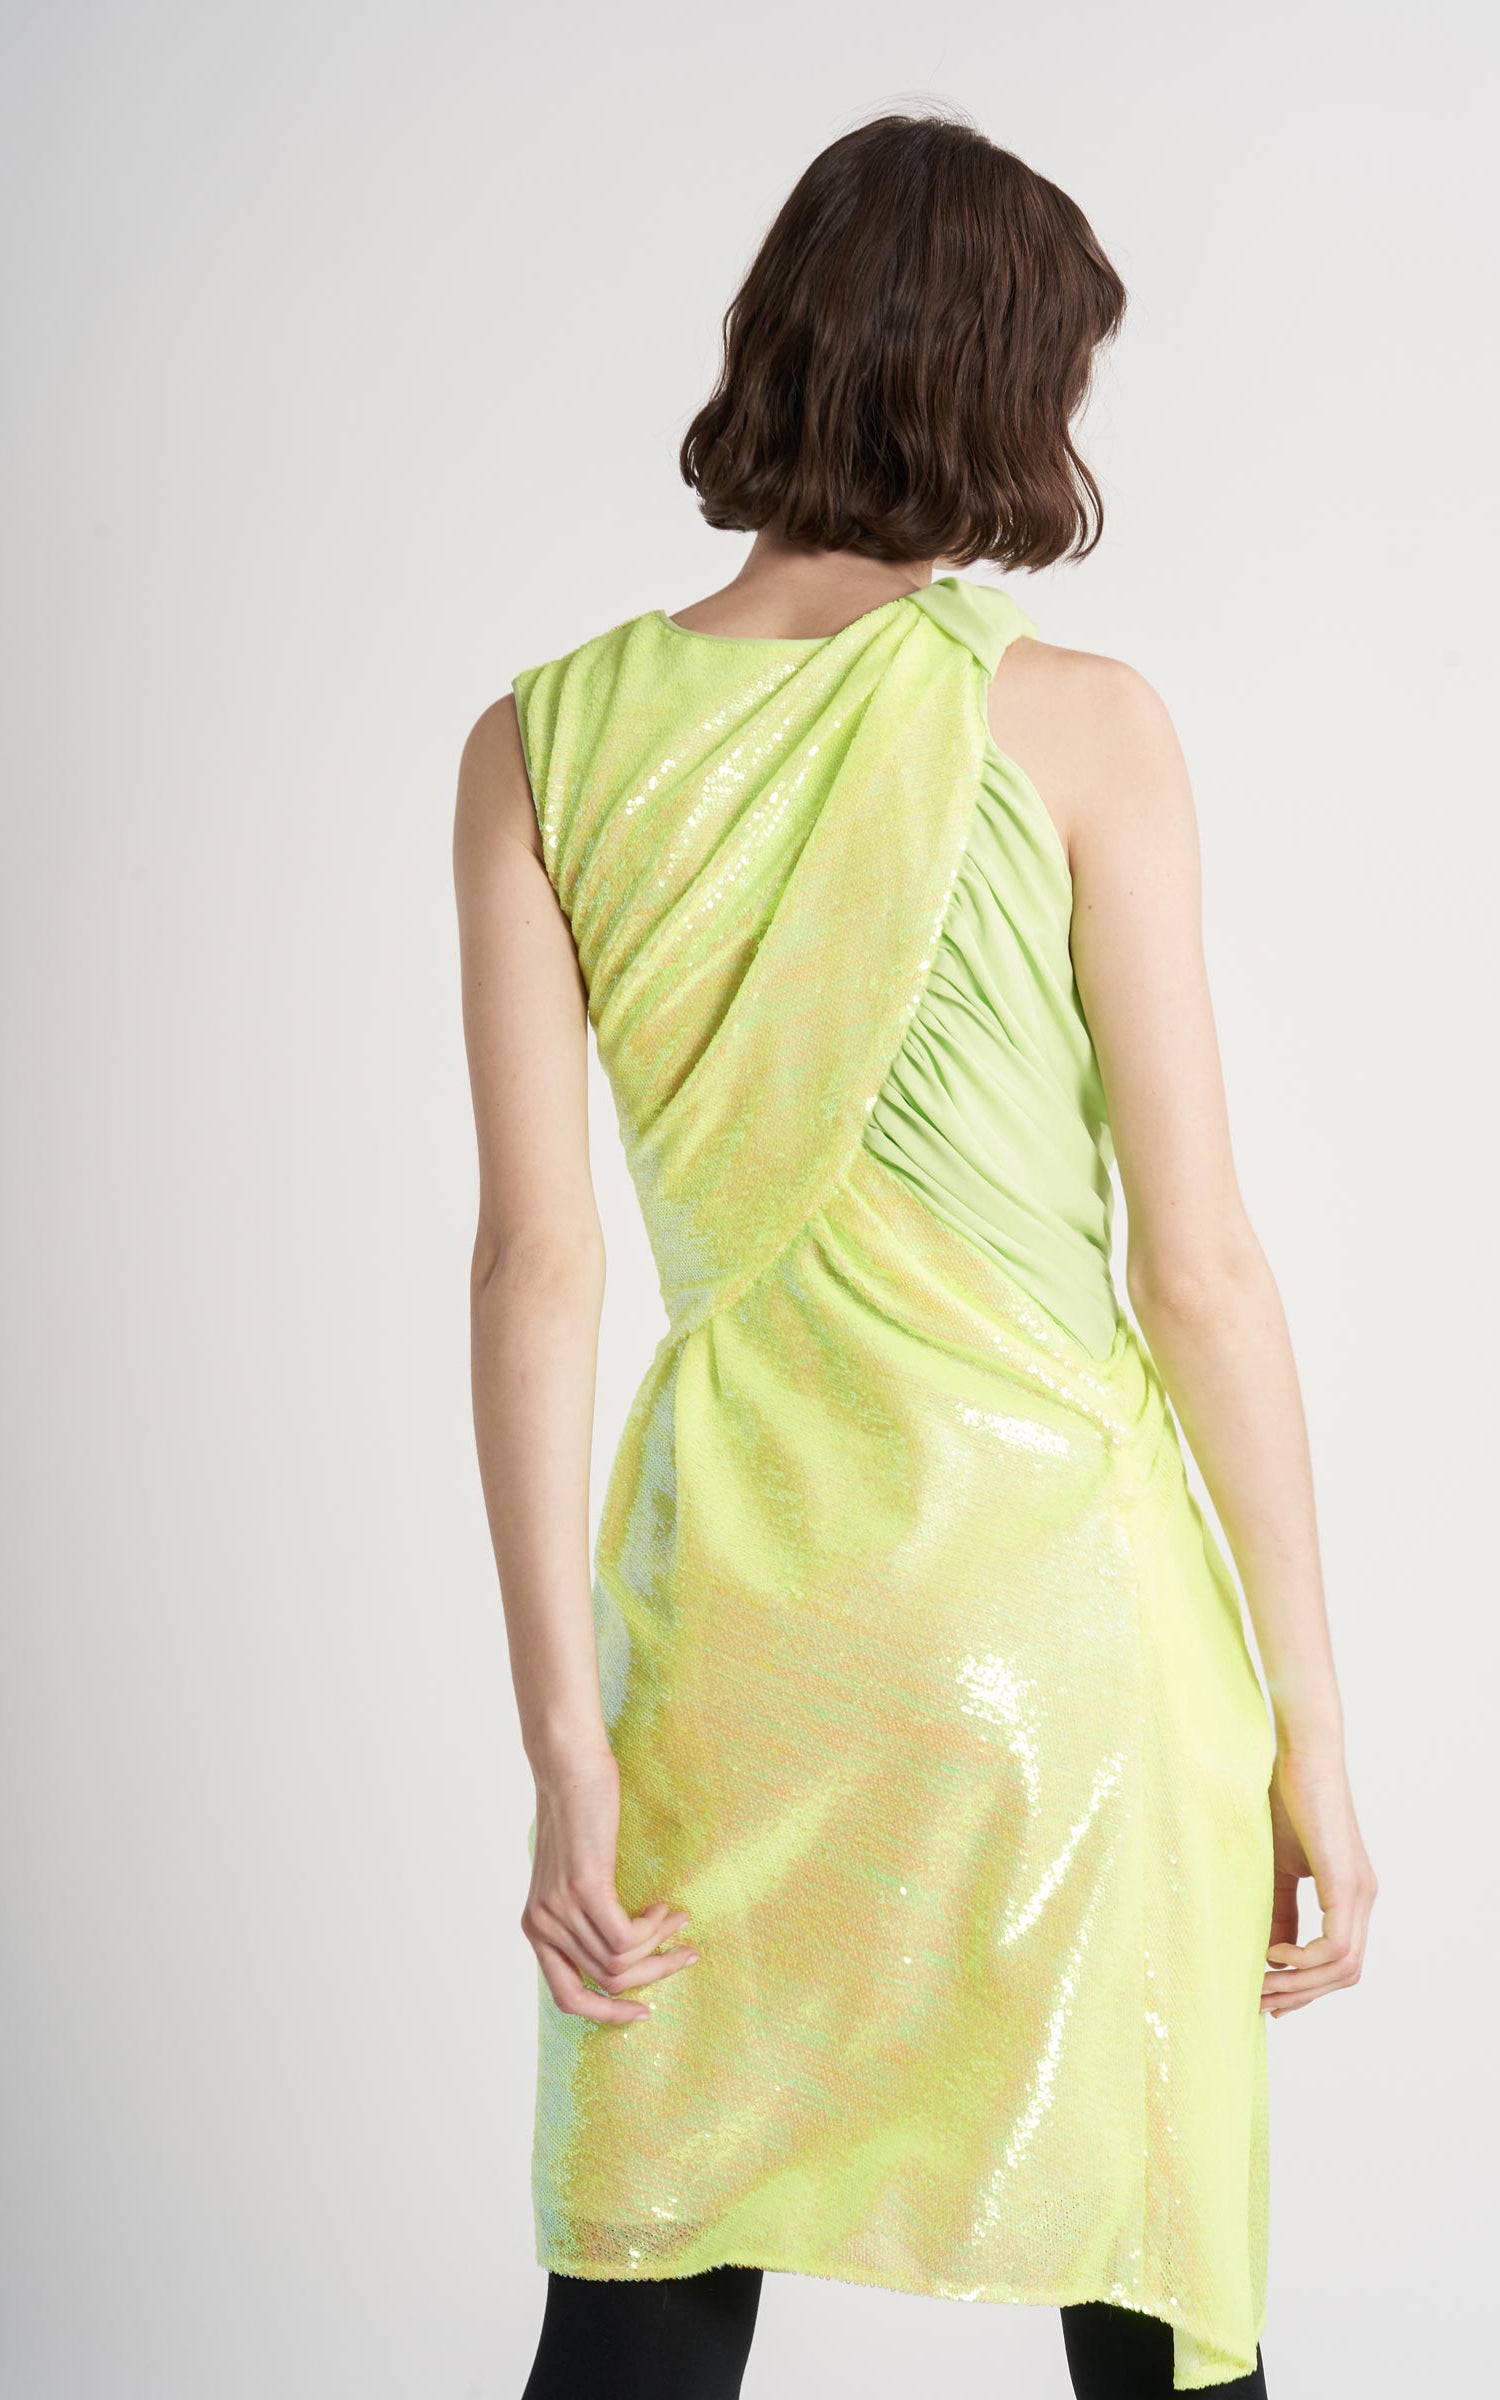 Quincy Neon Sequin Wrapped Dress